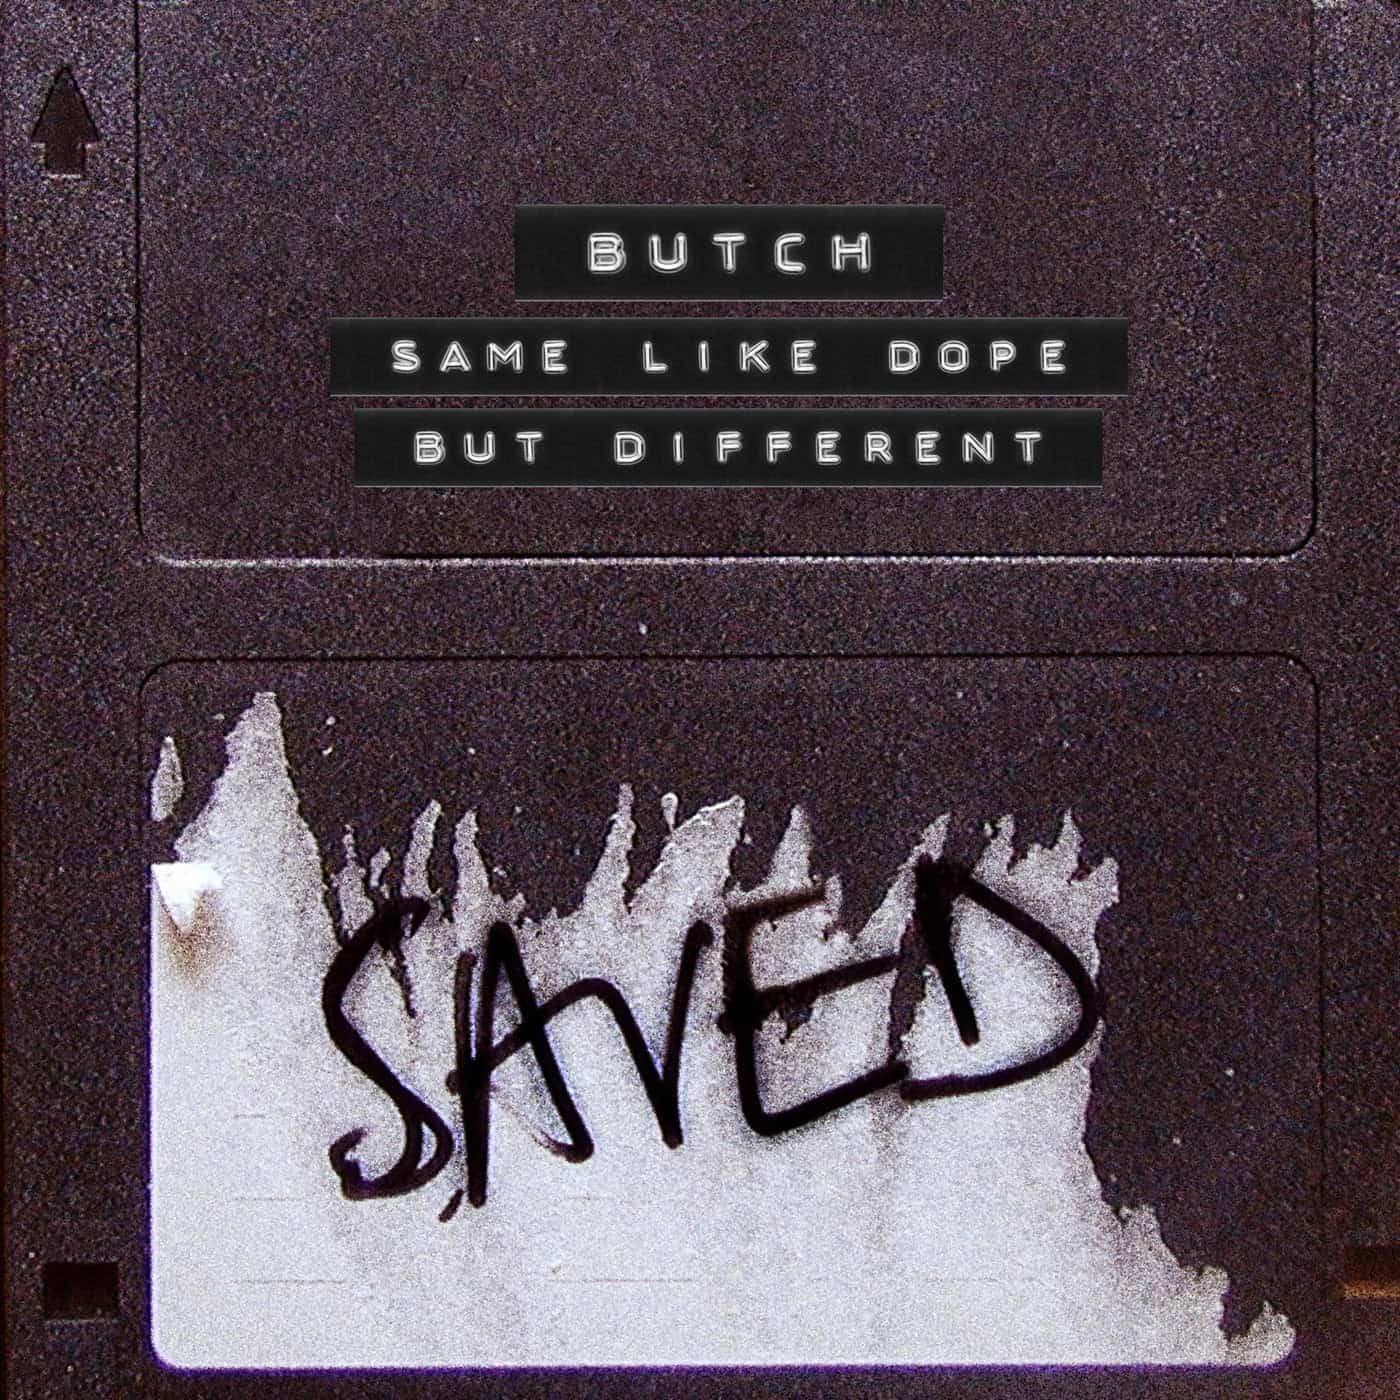 image cover: Butch - Same Like Dope But Different / SAVED27701Z